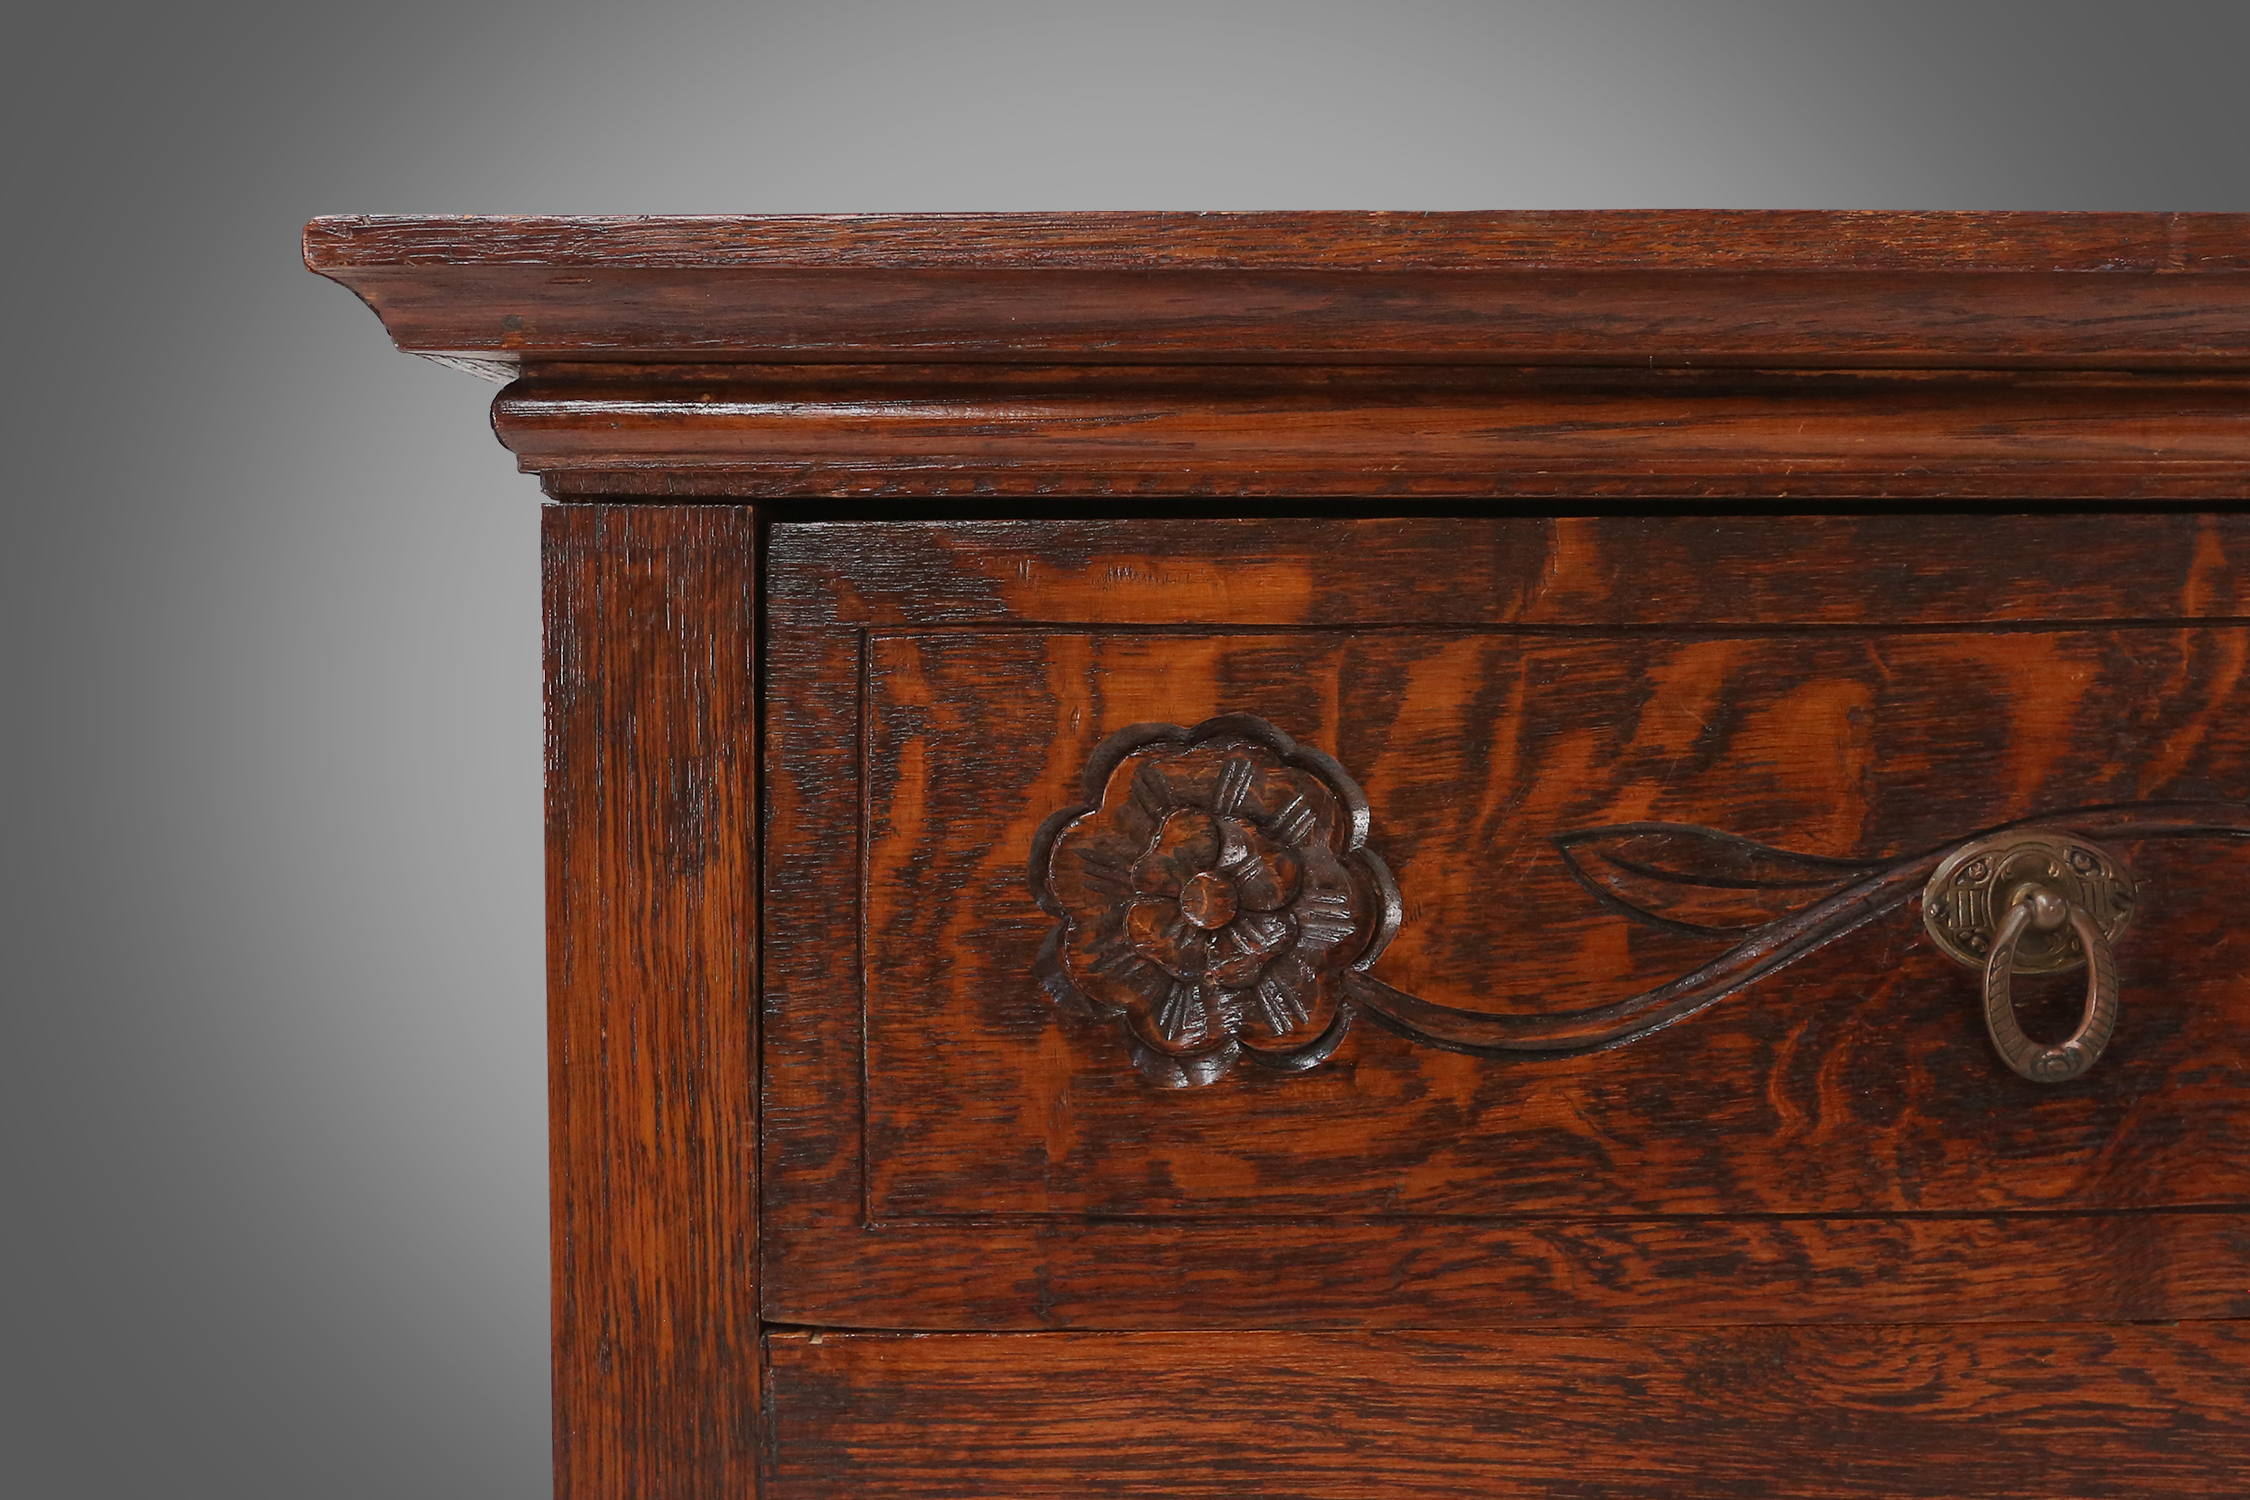 Remarkable Art Nouveau cabinet in oak with green glass, France, 1910thumbnail